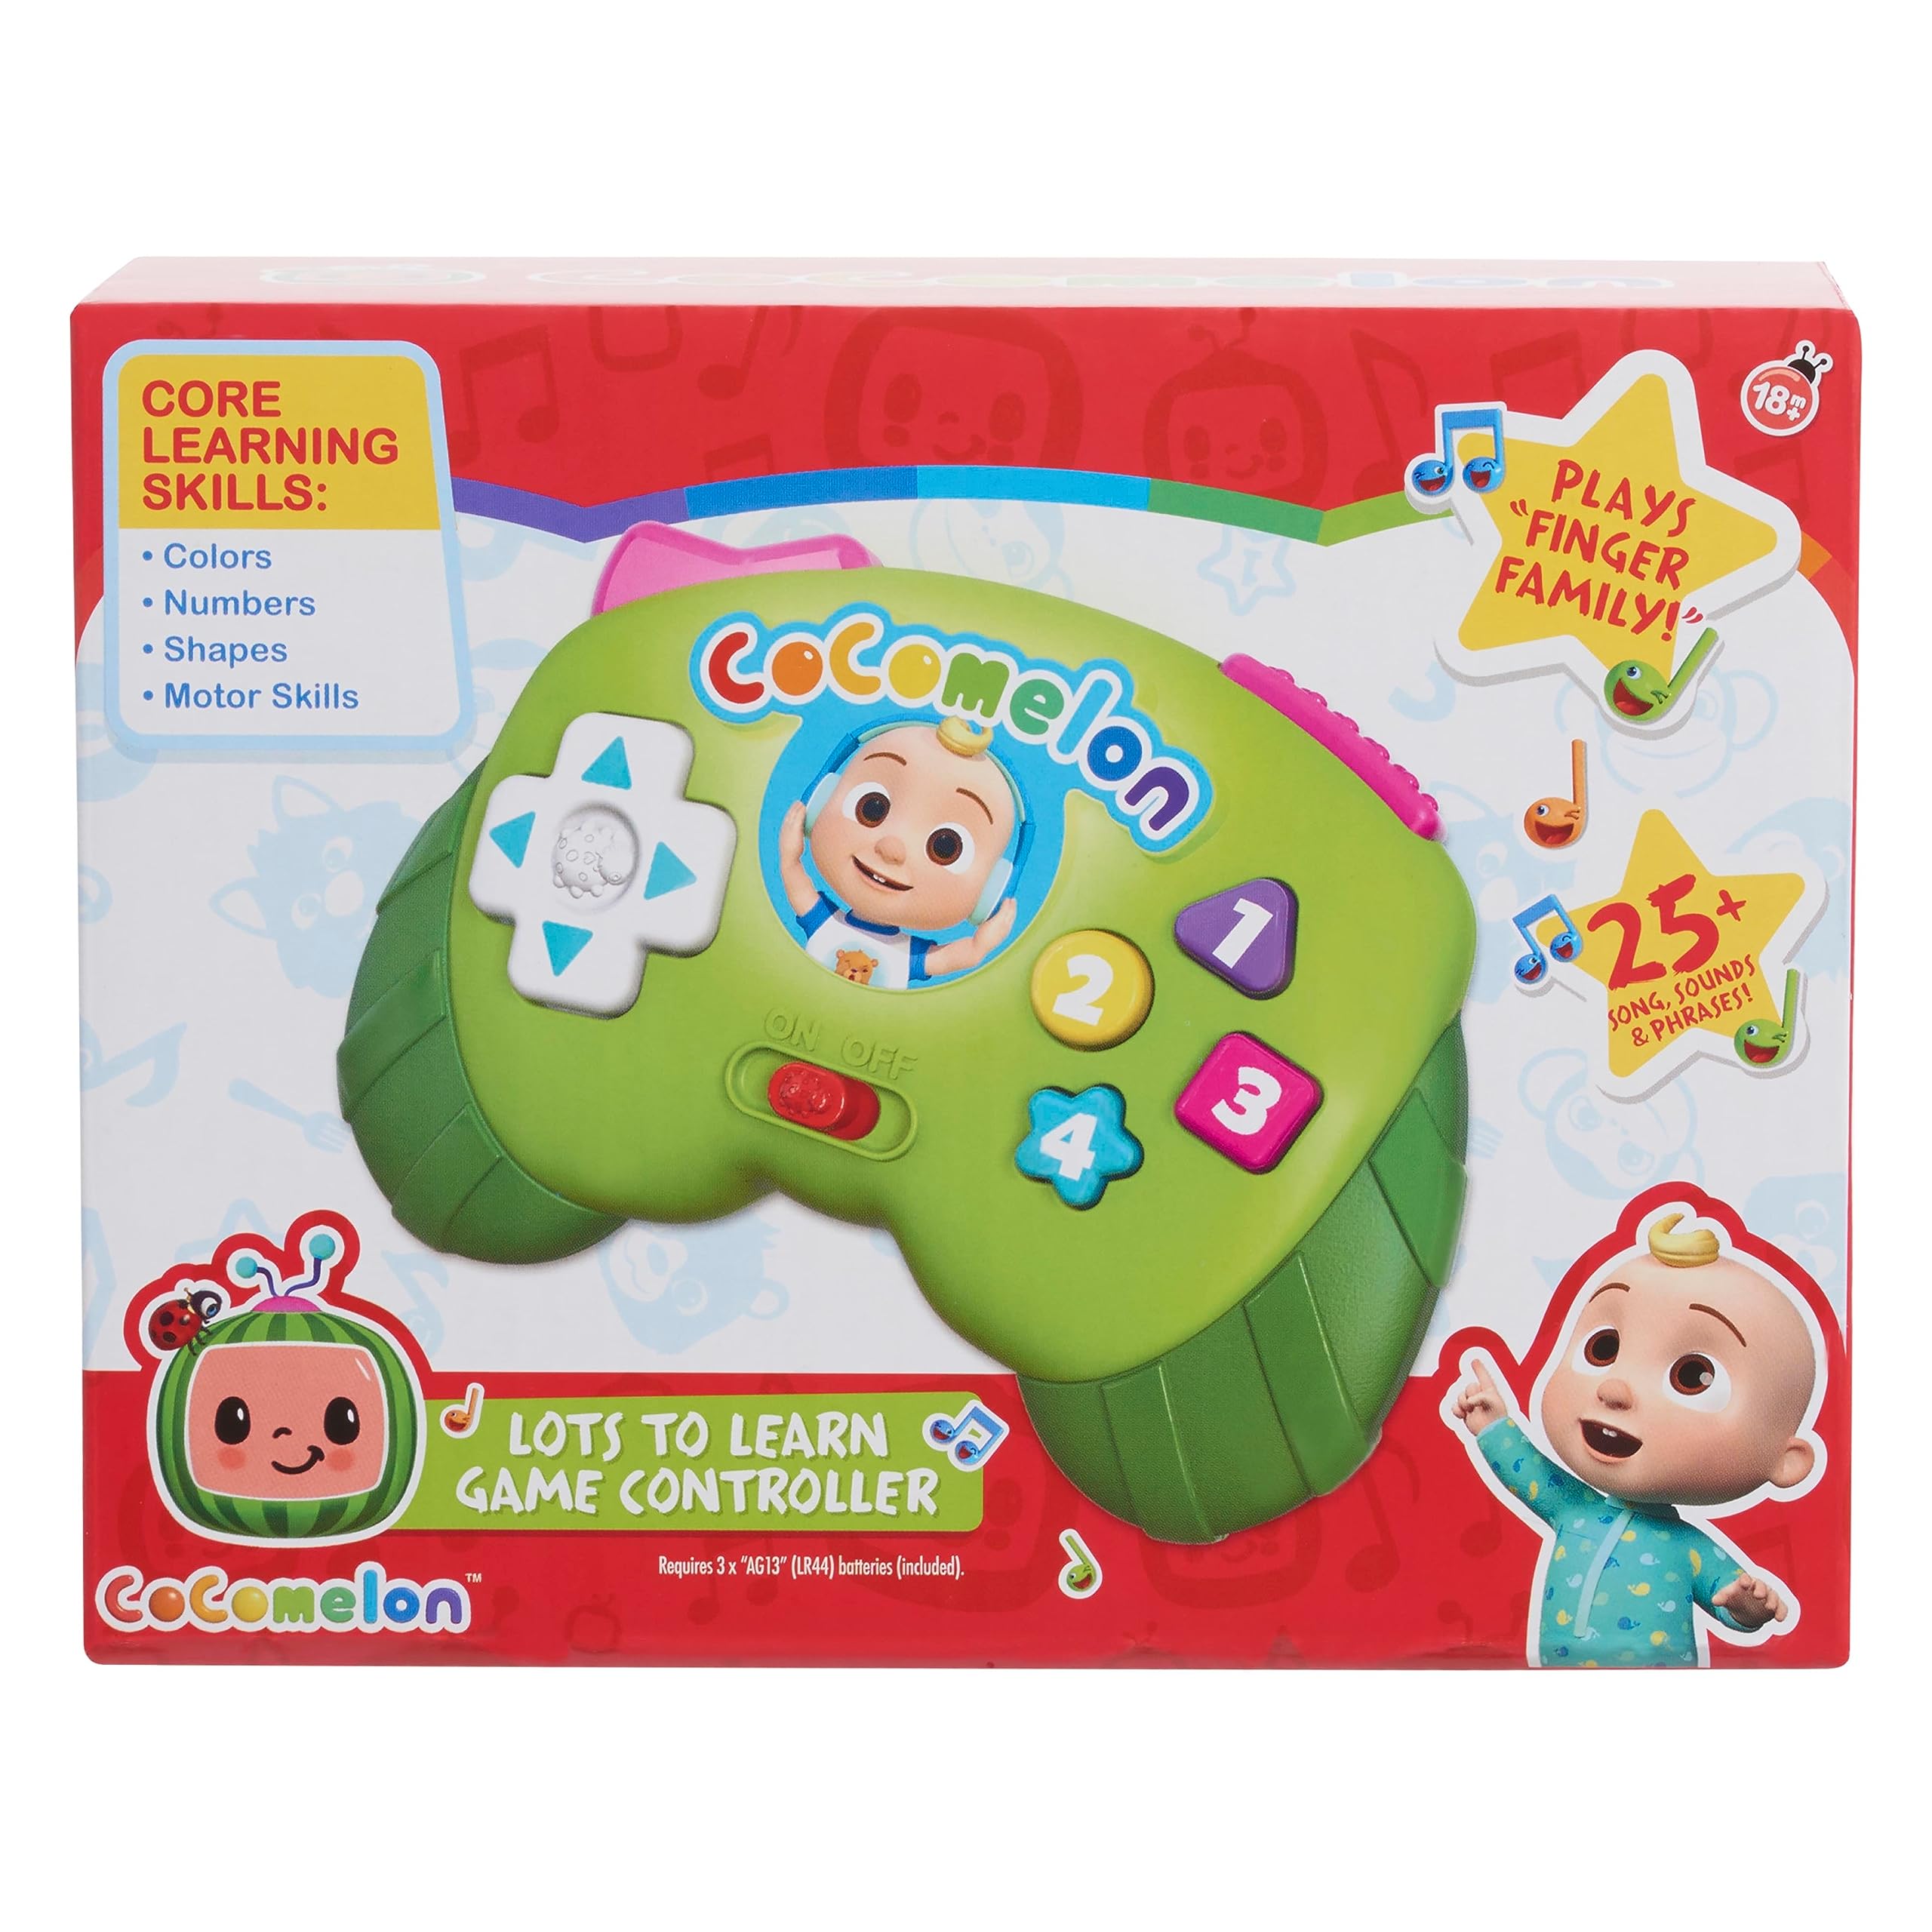 CoComelon Lots to Learn Game Controller, Preschool Learning and Education, Officially Licensed Kids Toys for Ages 18 Month by Just Play